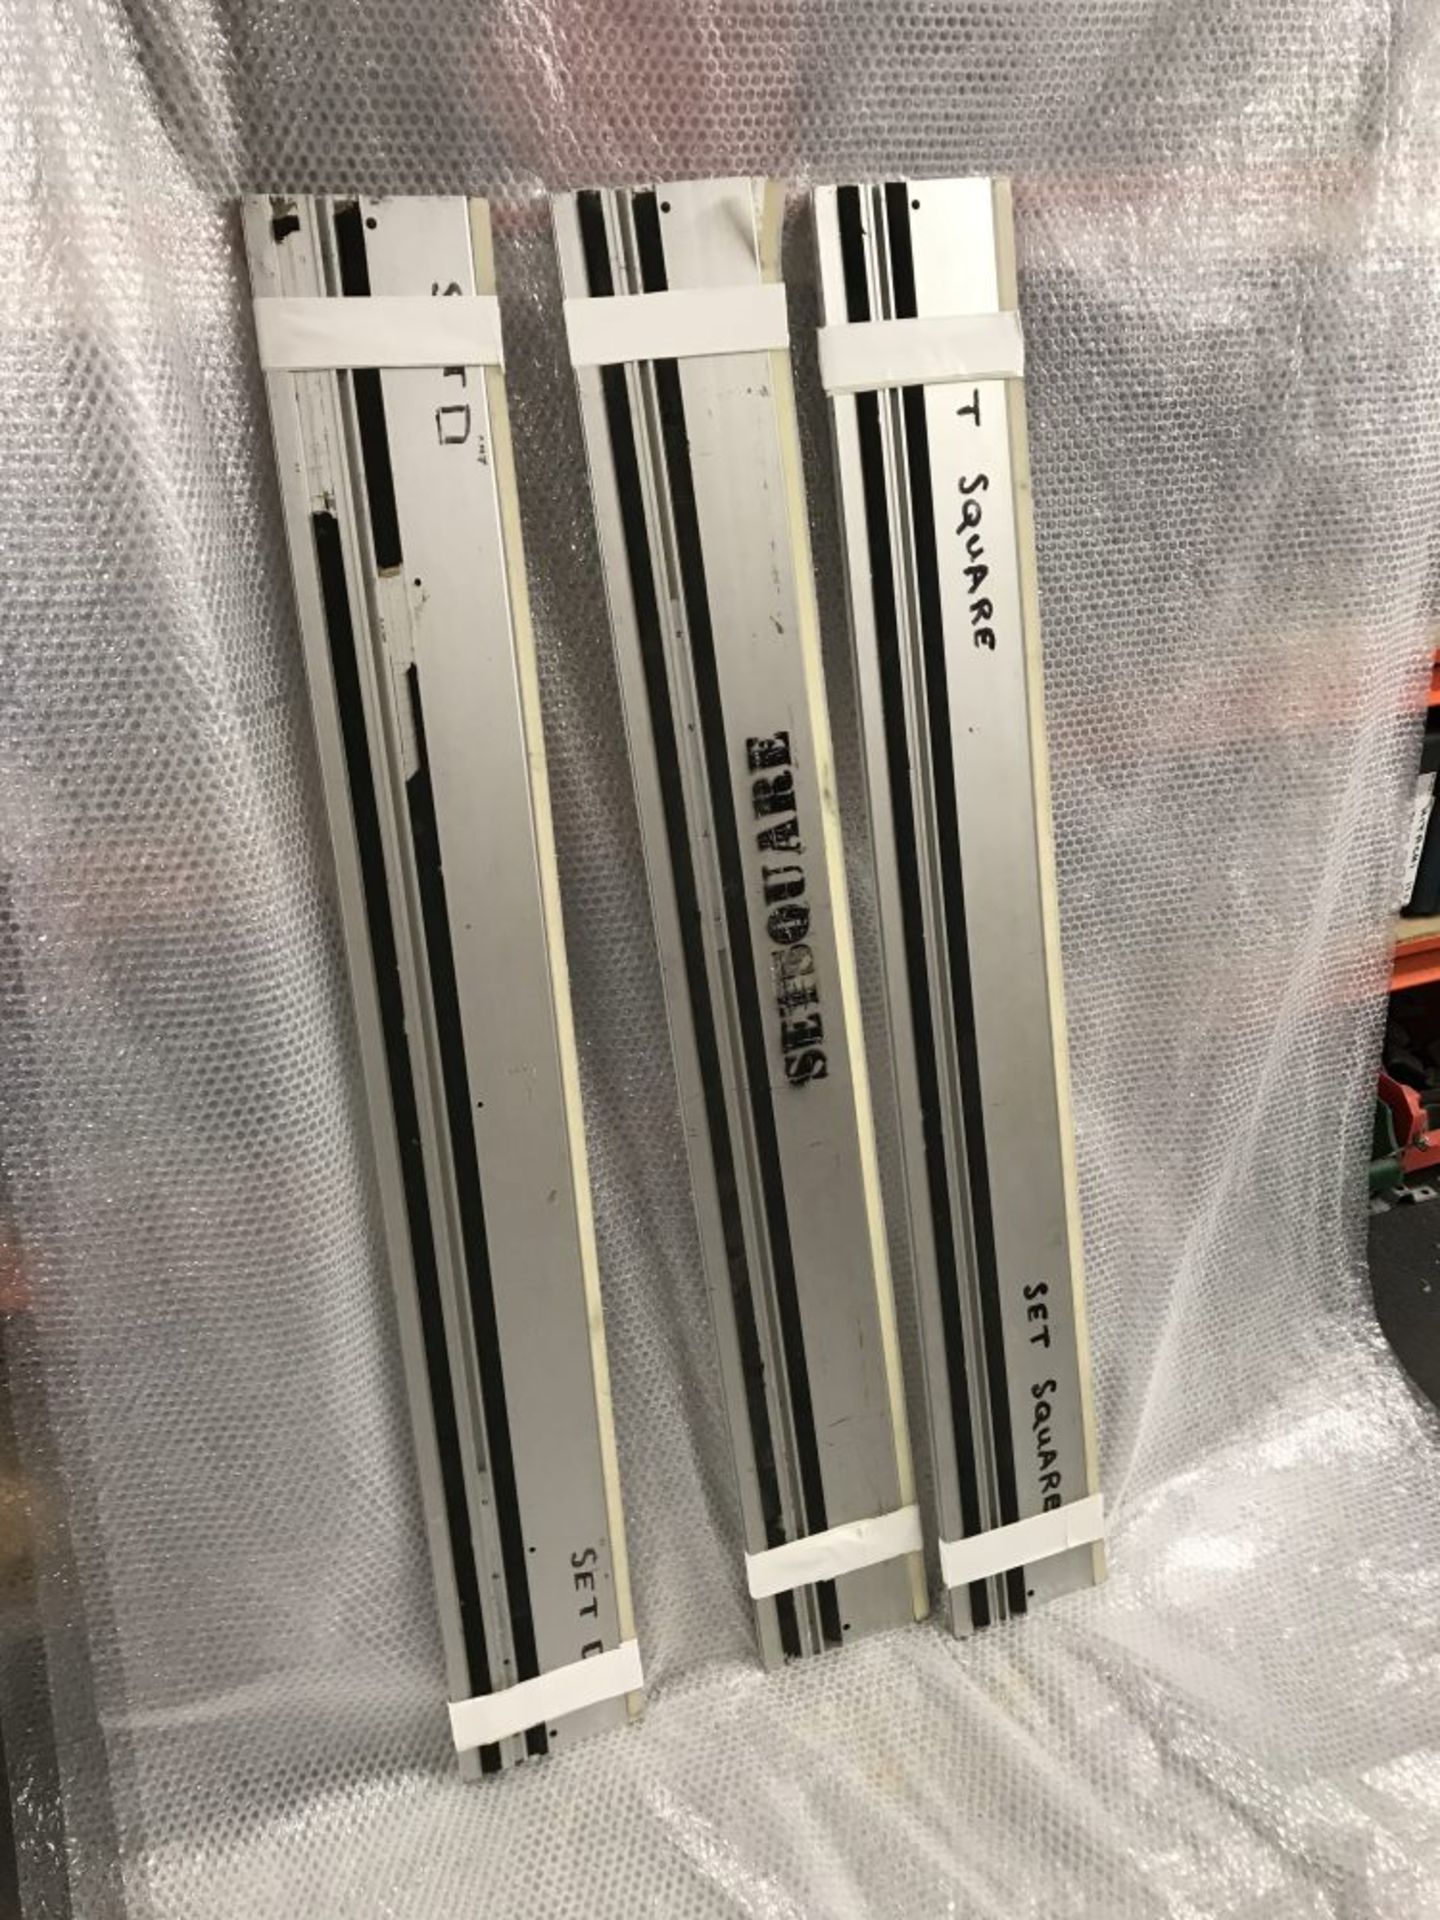 3 pairs of Festool FS 1400/2 guide rails, 6 in total